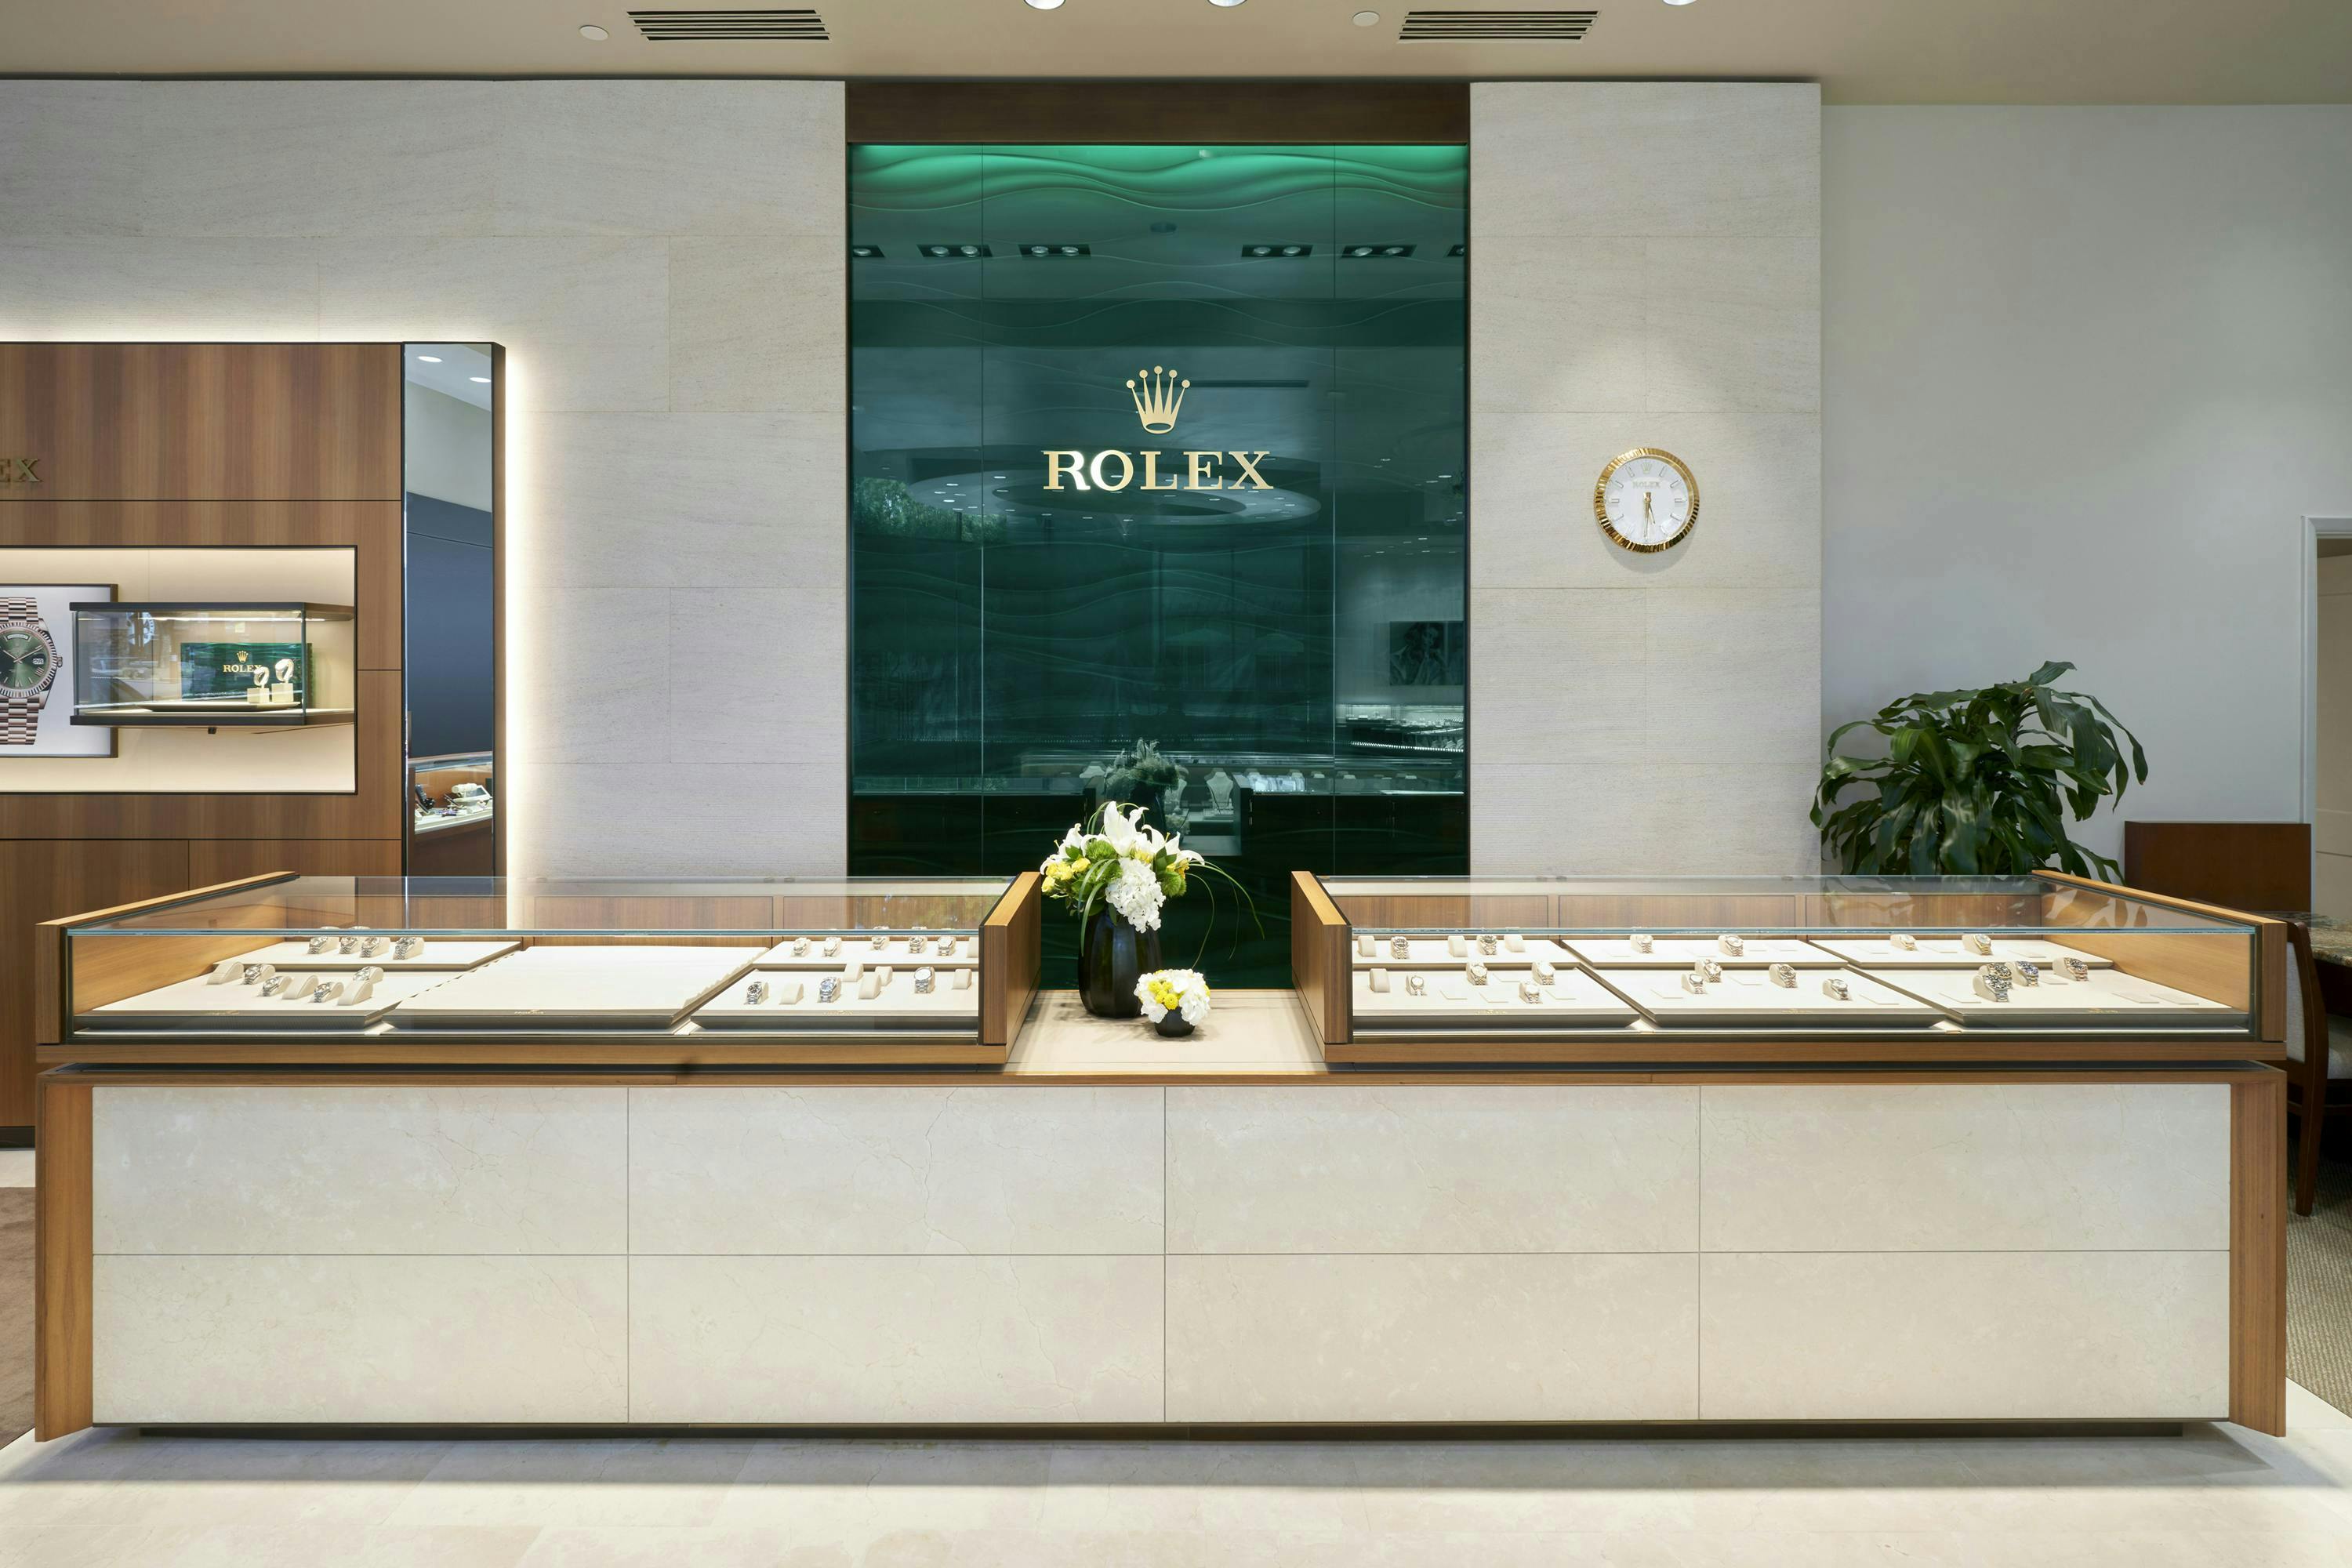 Rolex storefront showroom at Lee Michaels Fine Jewelry location in Albuquerque, New Mexico.